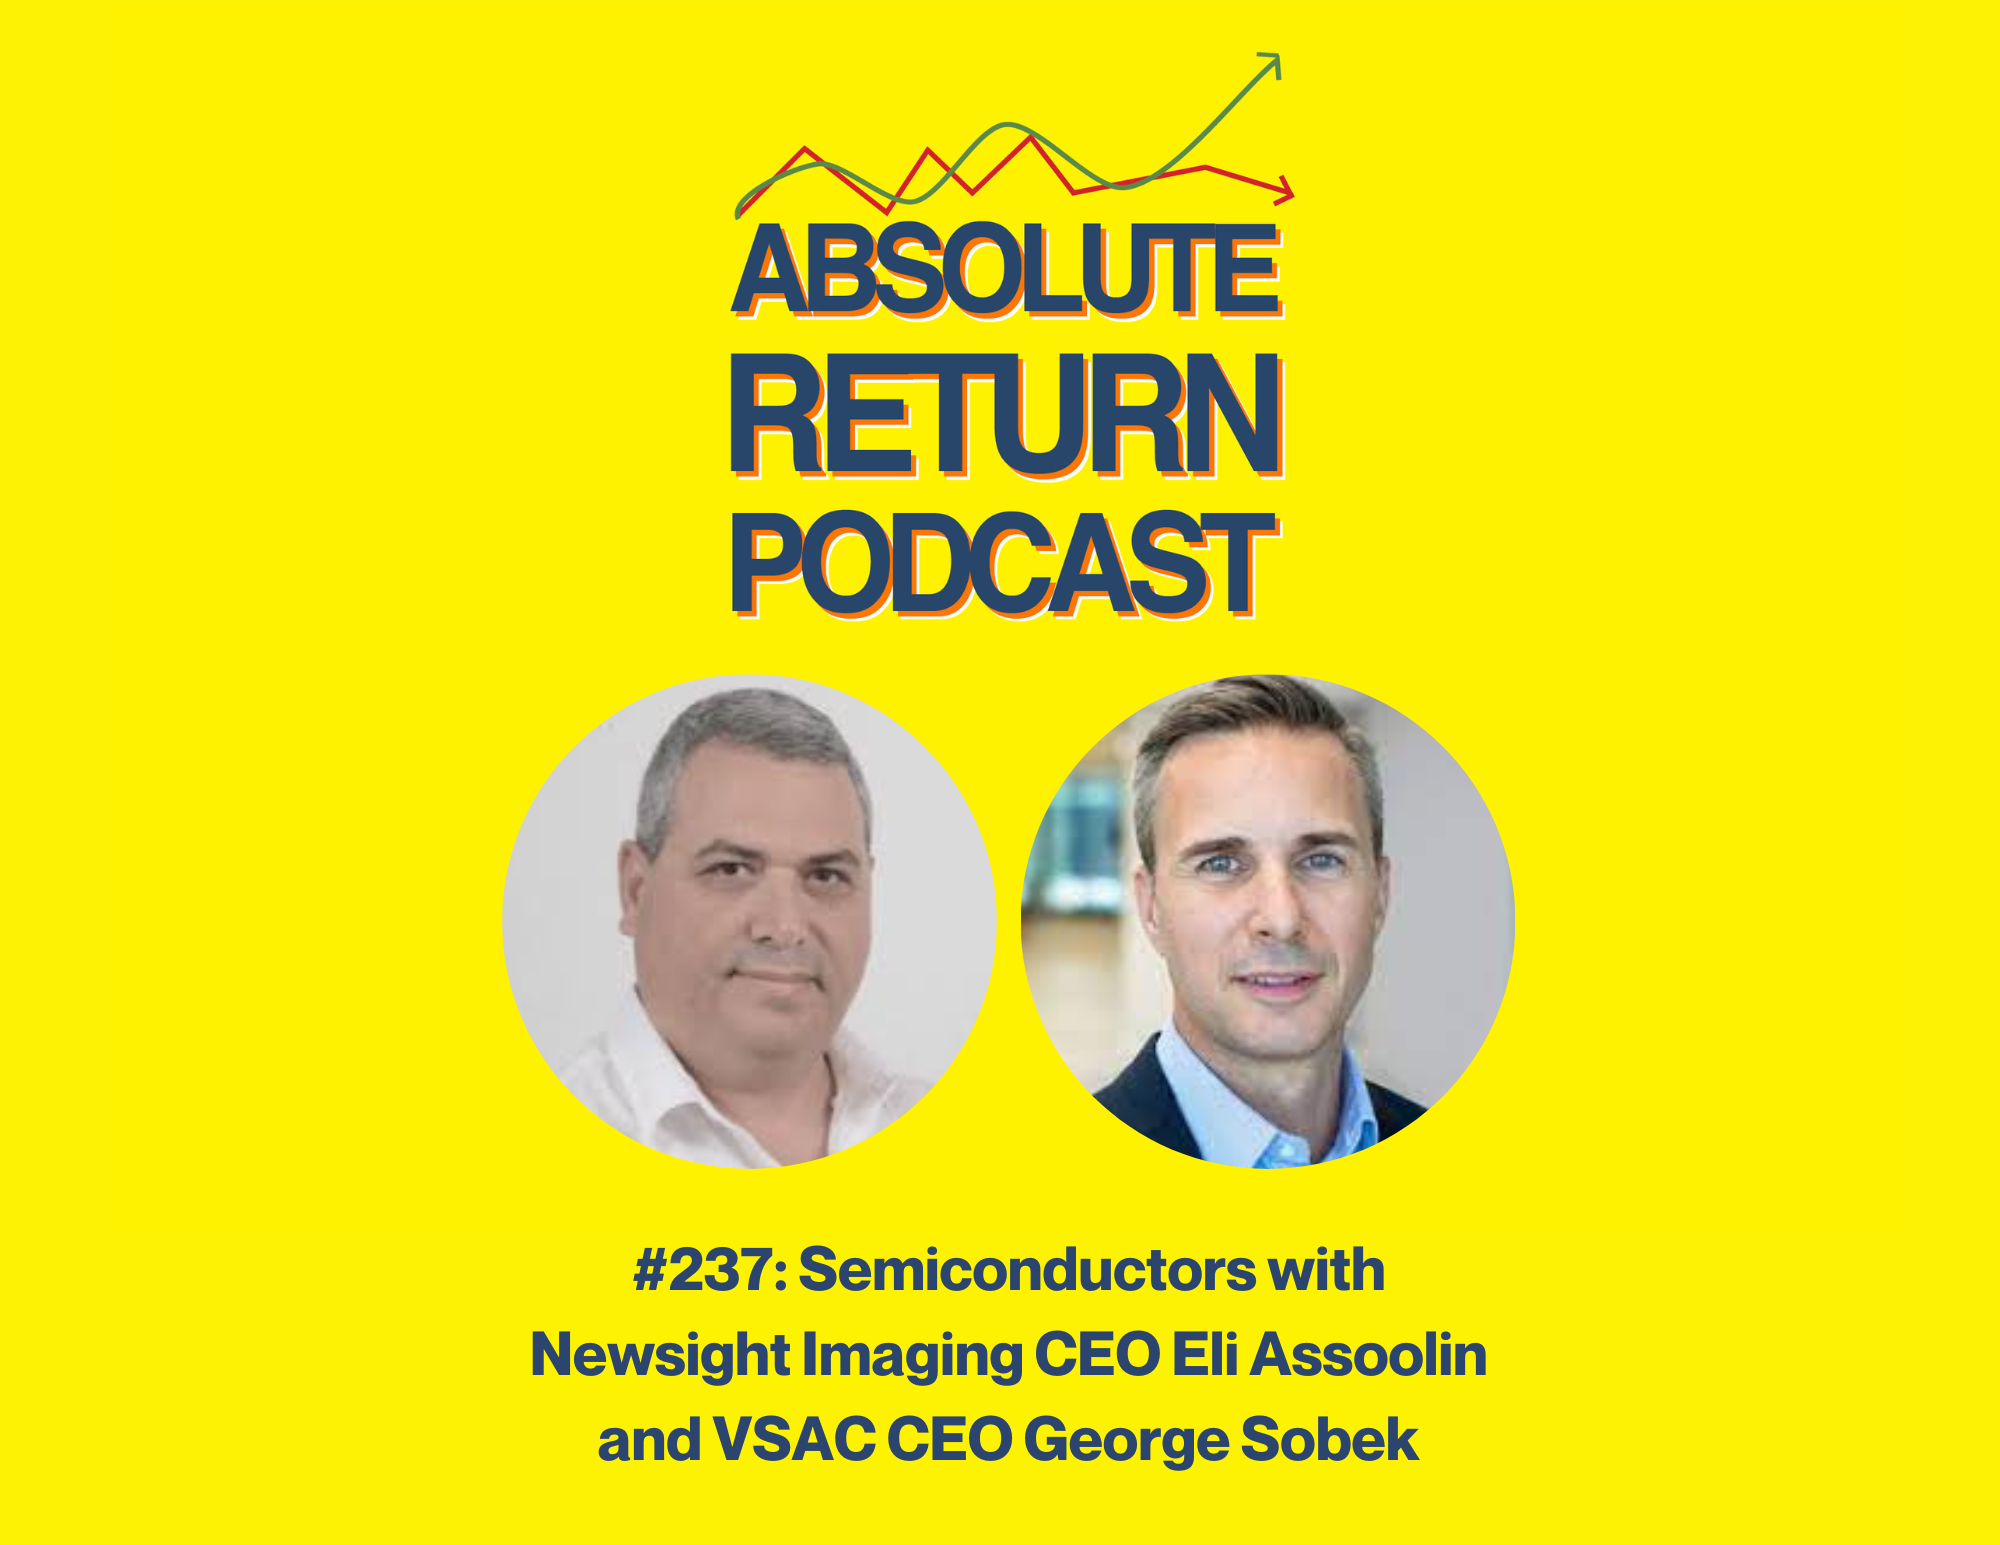 Absolute Return Podcast #237: Semiconductors with Newsight Imaging CEO Eli Assoolin and VSAC CEO George Sobek